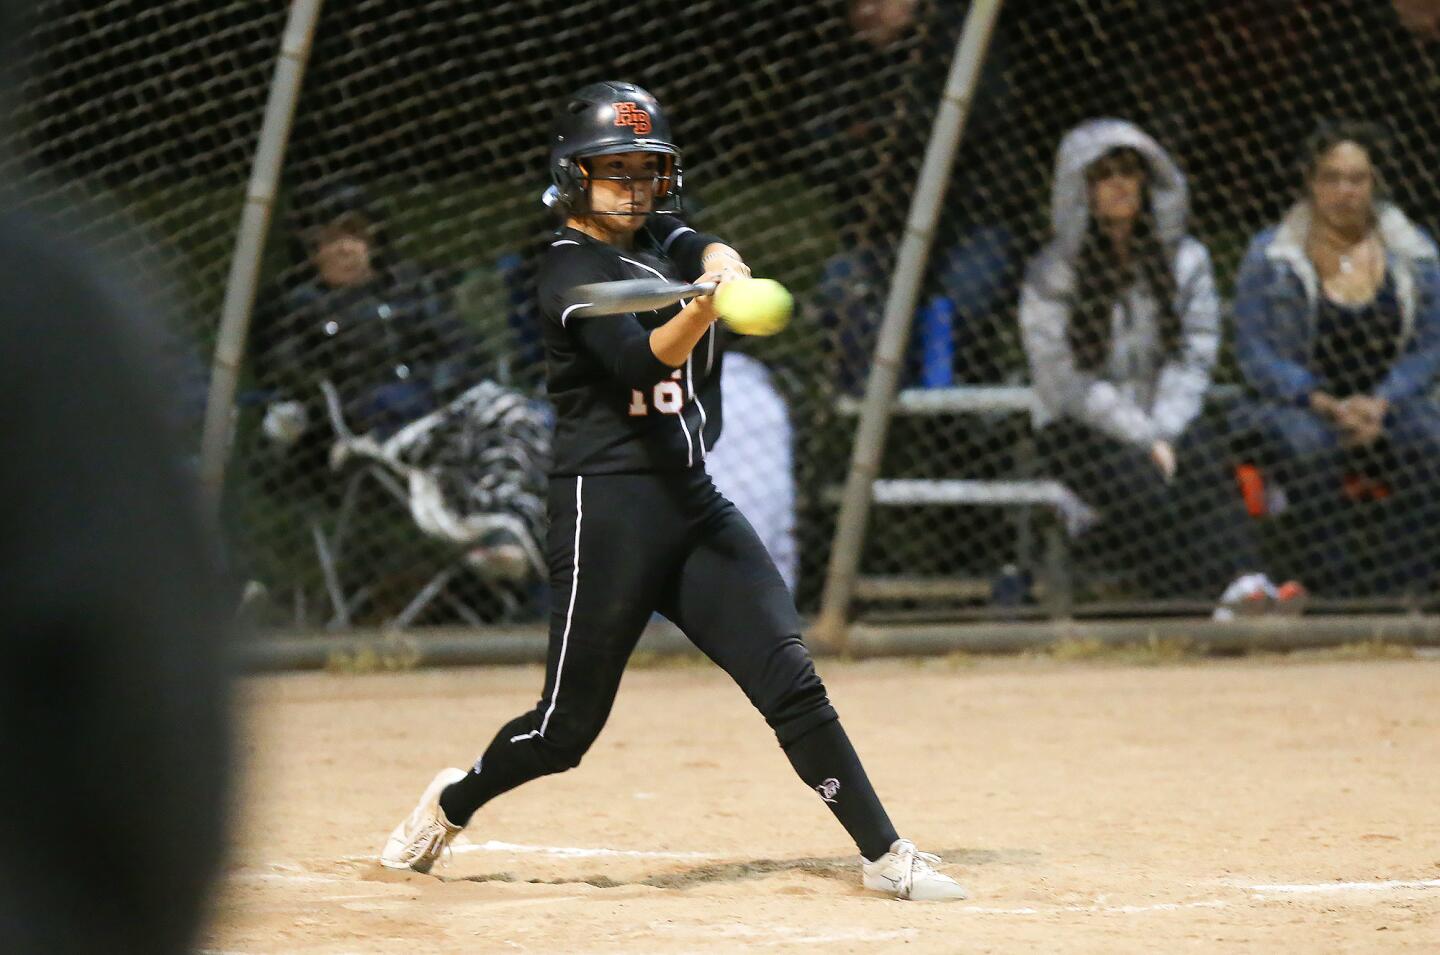 Huntington Beach High's Megan Ryono hits an RBI double during the Michelle Carew Classic game against El Cajon Granite Hills at Peralta Canyon Park in Anaheim on Thursday.